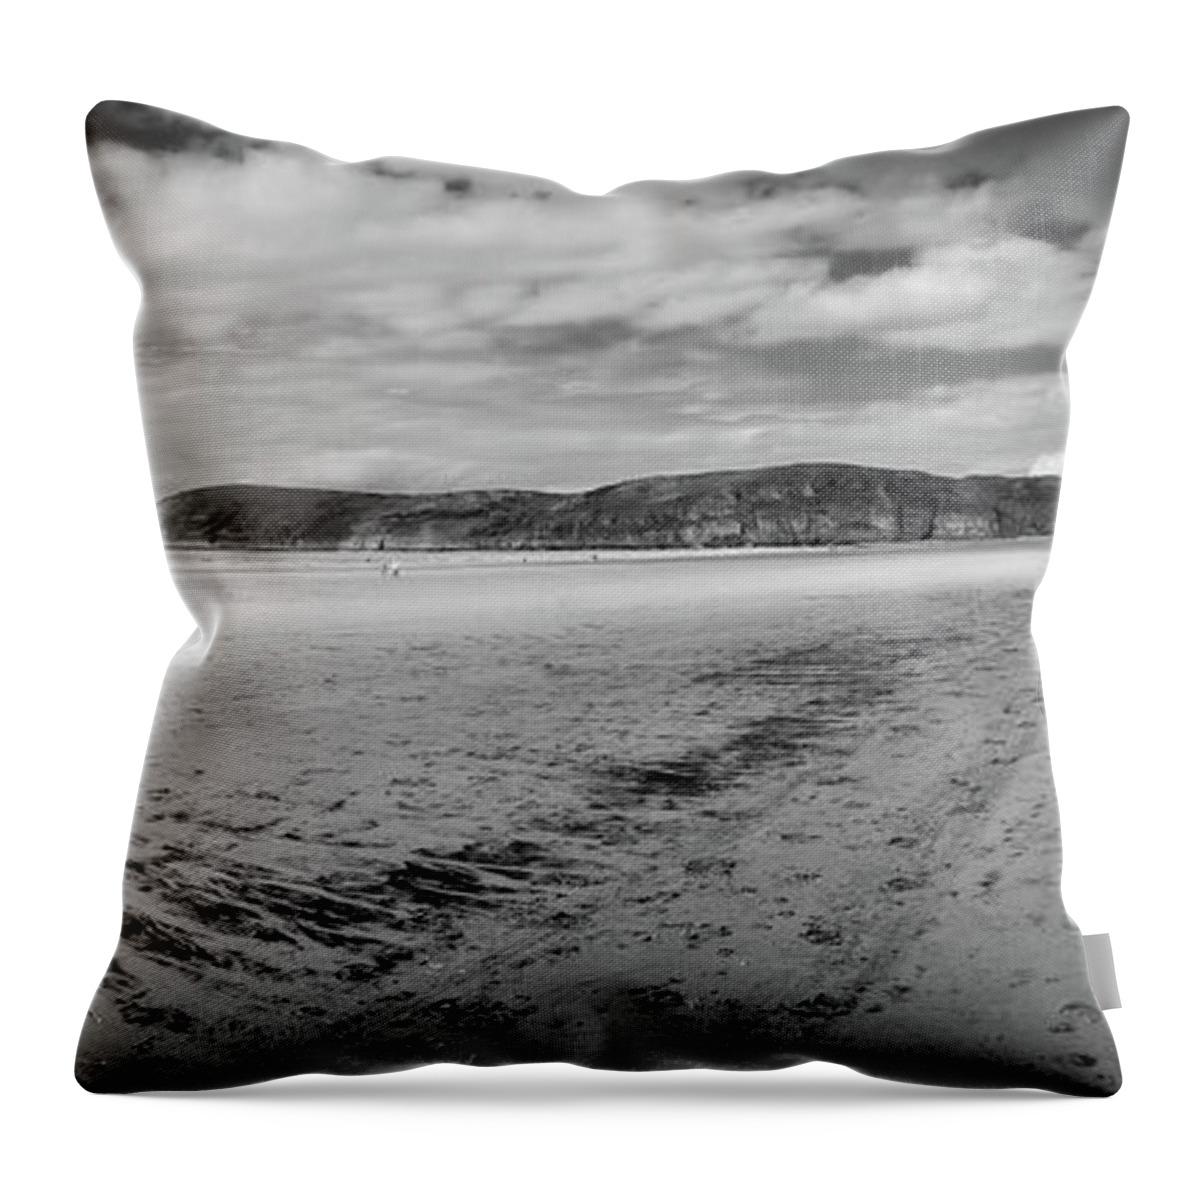 5 Or More People Throw Pillow featuring the photograph Brean Sands panorama by Seeables Visual Arts